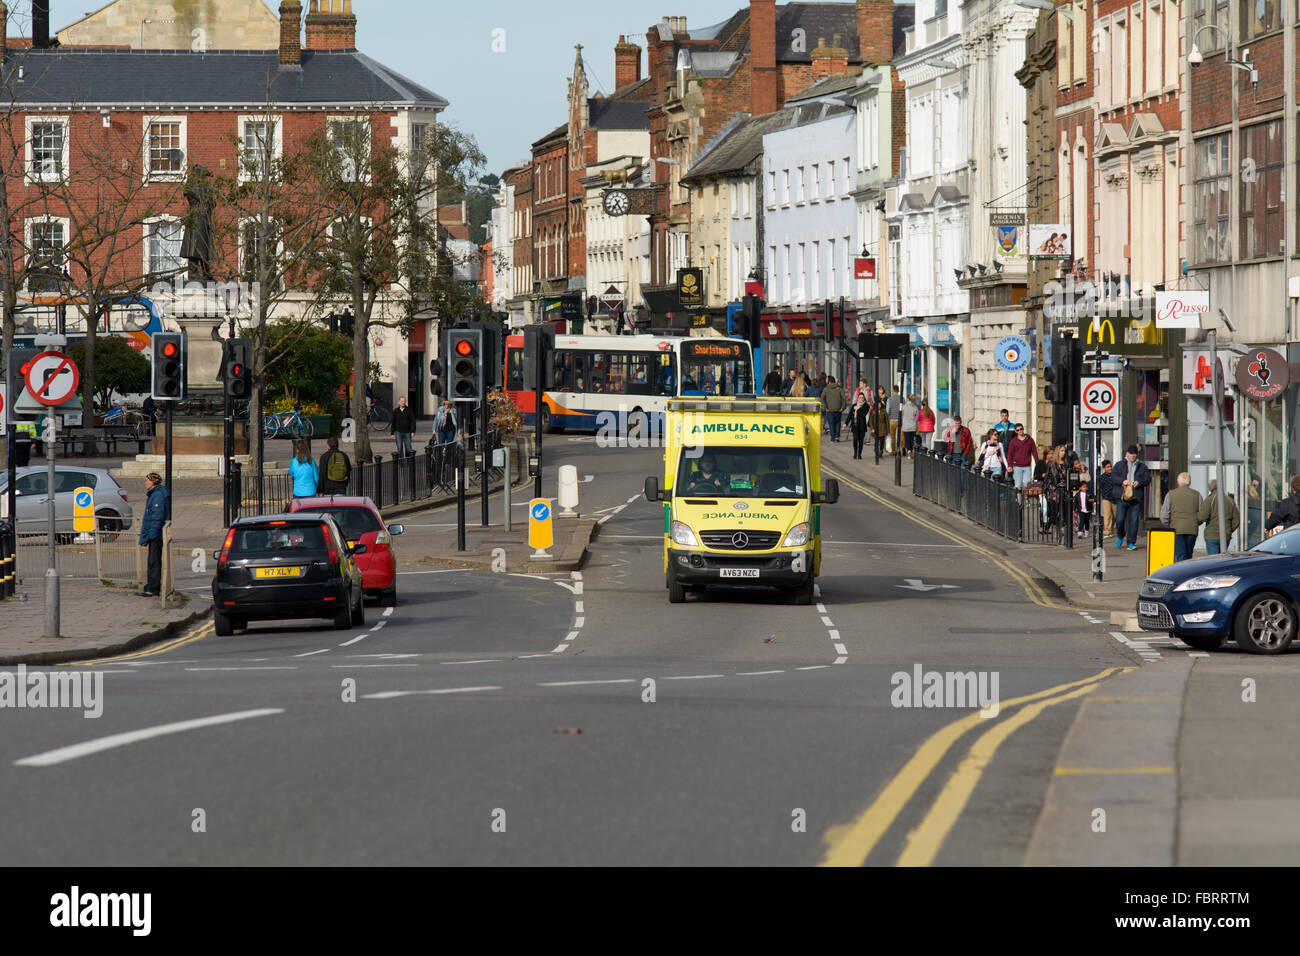 Ambulance responding to emergency with blue lights on in the High Street in Bedford, Bedfordshire, England Stock Photo